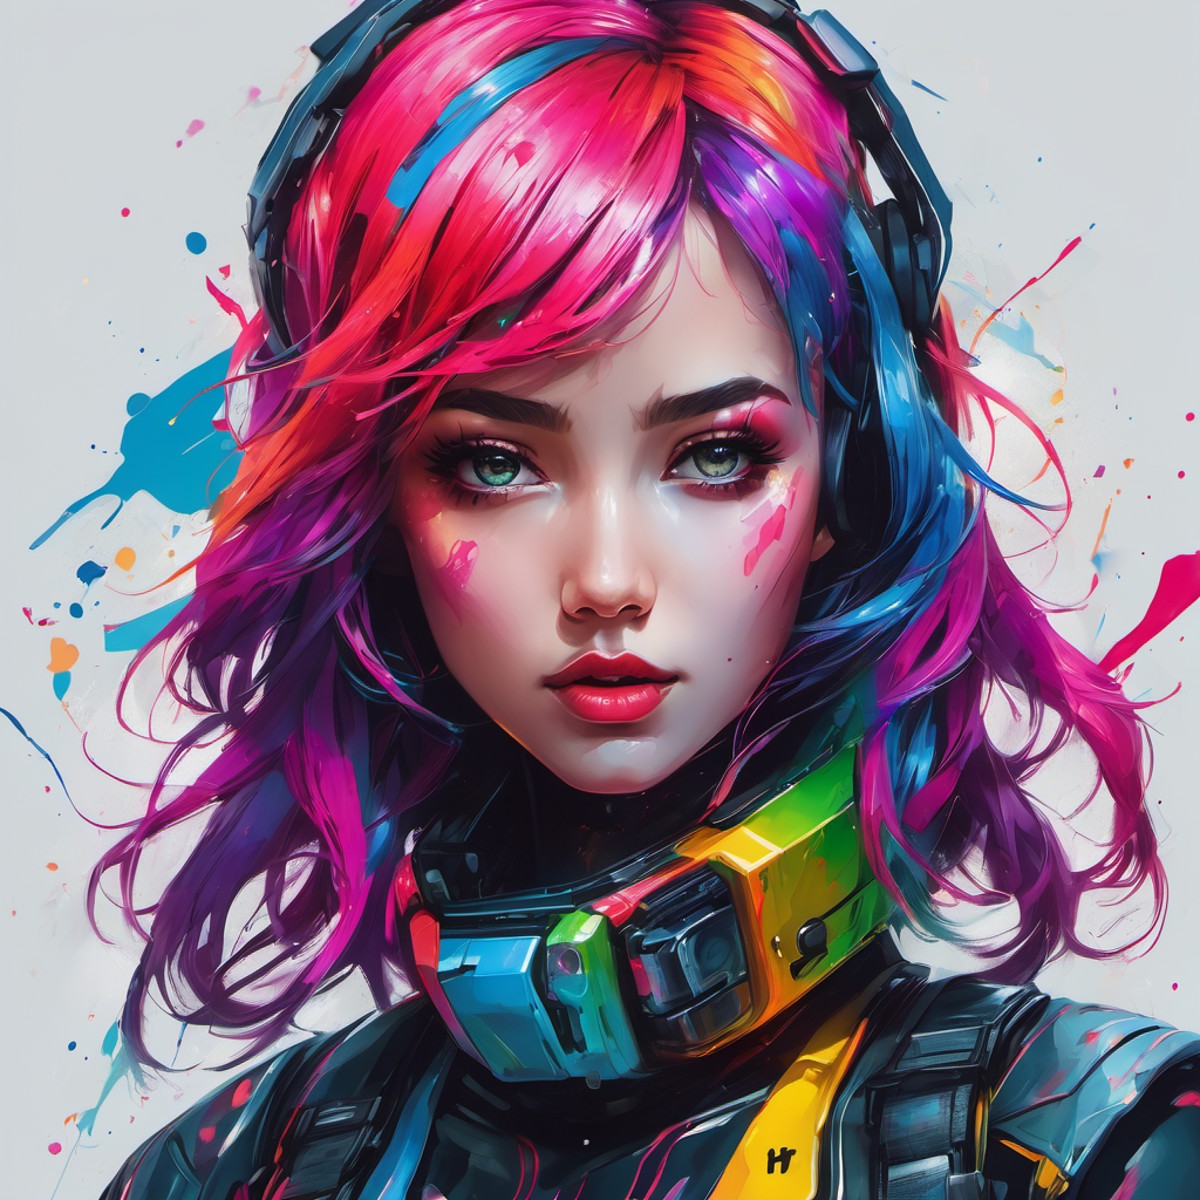 the portrait of a woman with colorful paint on her hair, in the style of cyberpunk manga, bold color palette, gothcore, ch...